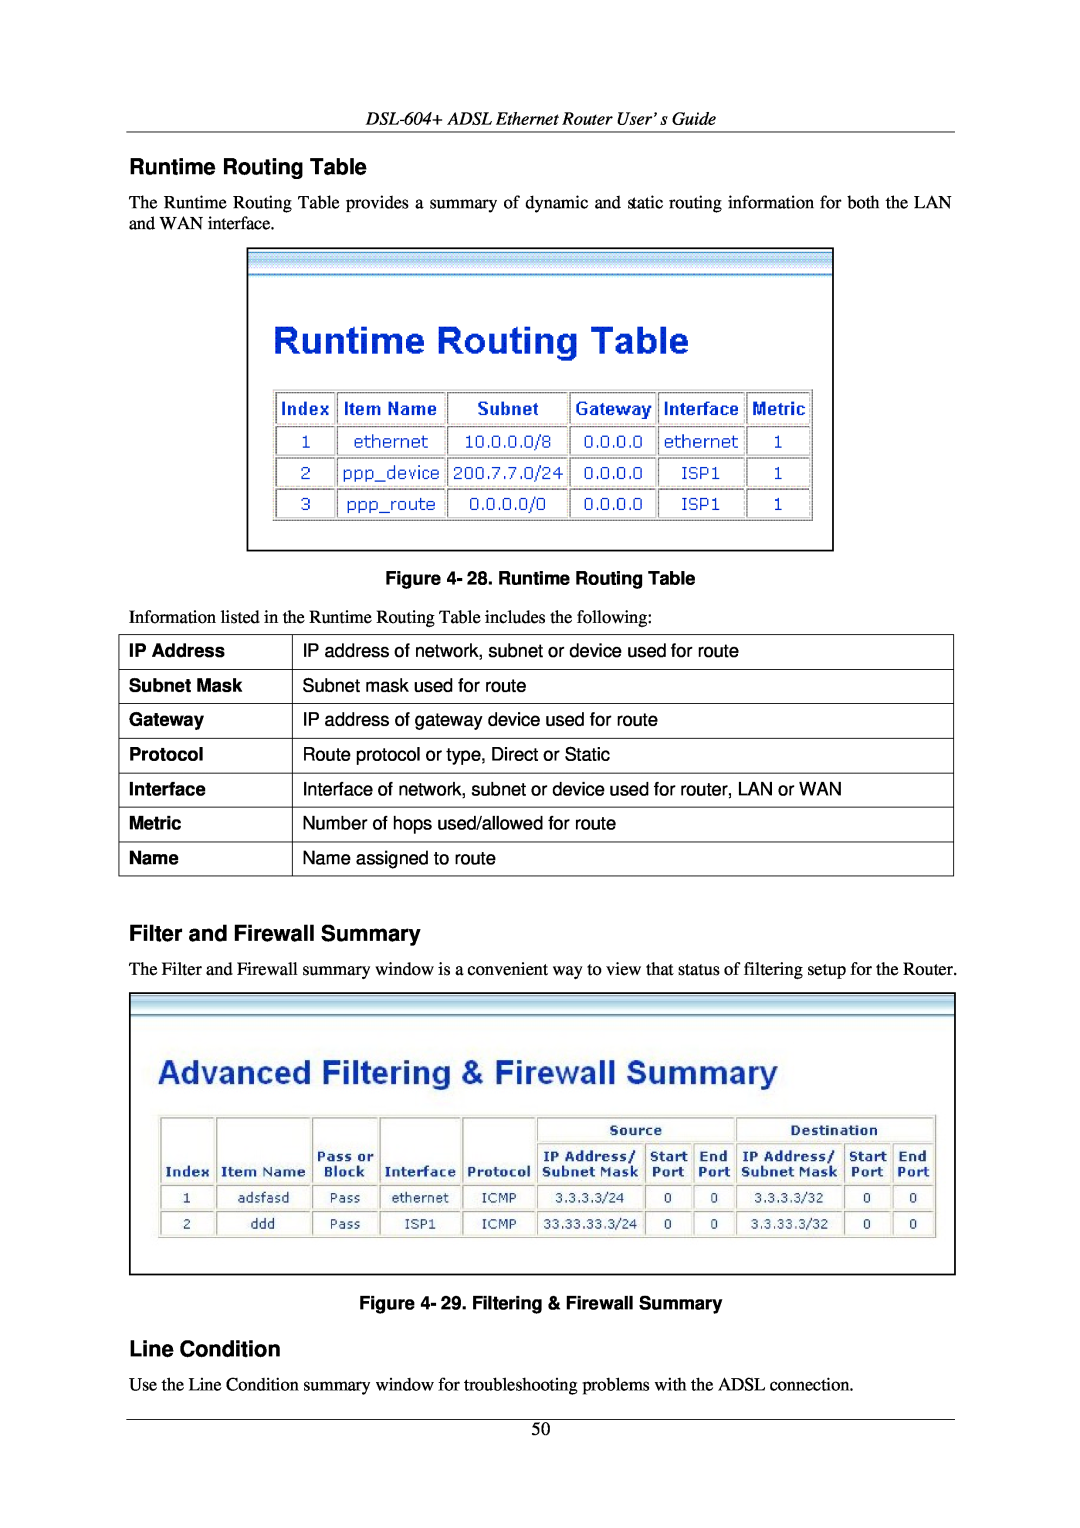 D-Link DSL-604+ manual Runtime Routing Table, Filter and Firewall Summary, Line Condition 